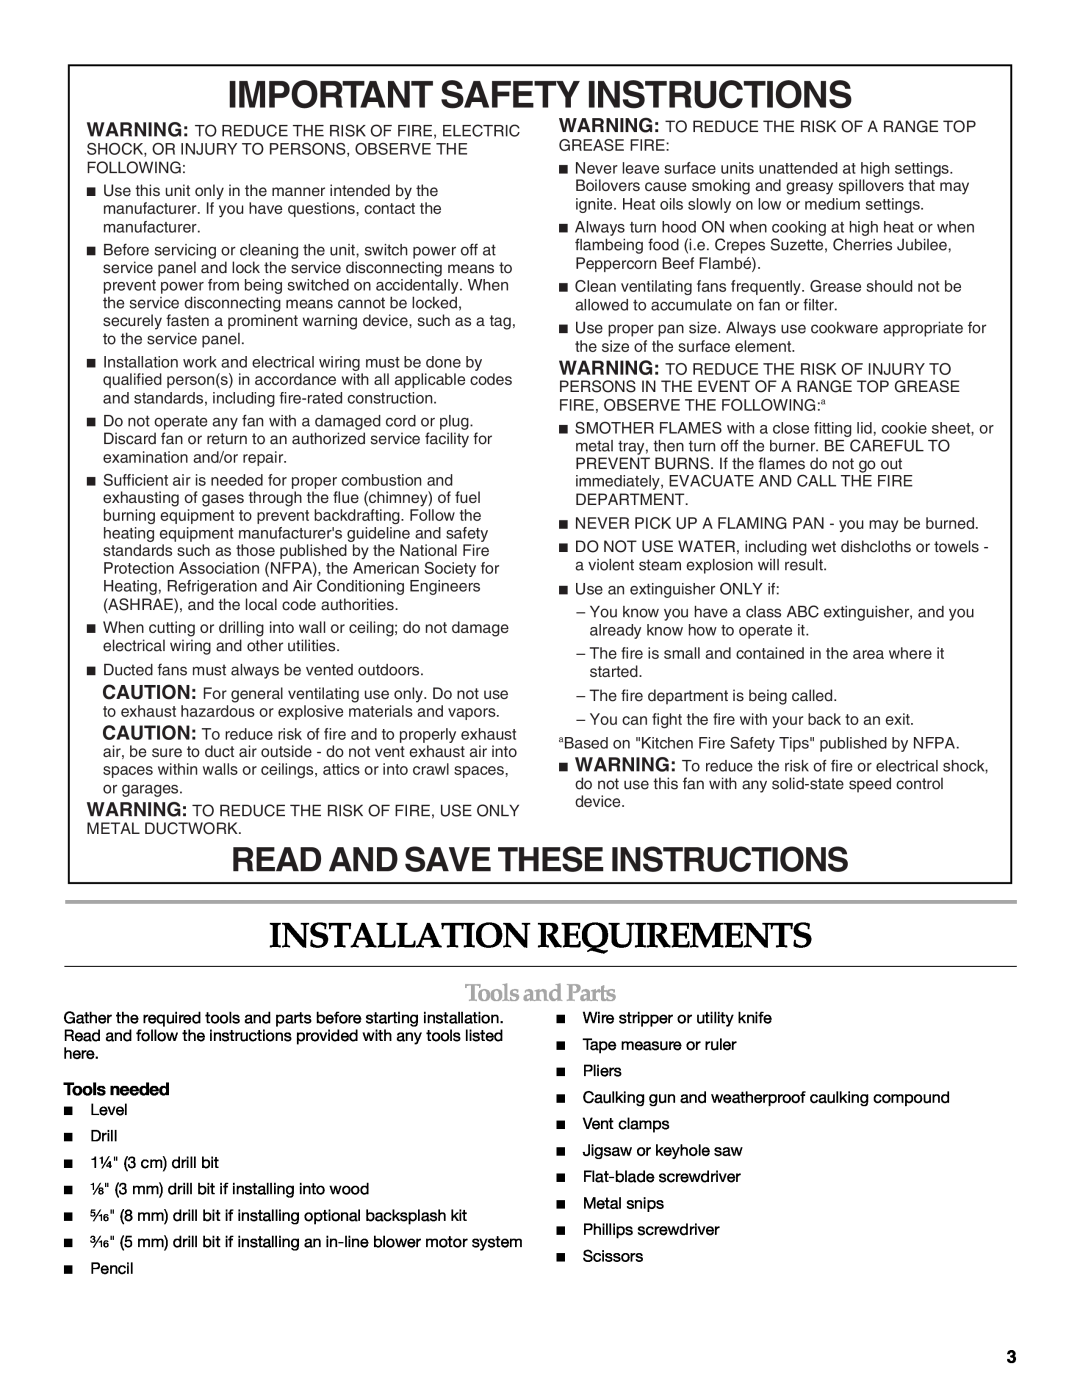 KitchenAid W10331007B Important Safety Instructions, Installation Requirements, Read And Save These Instructions 